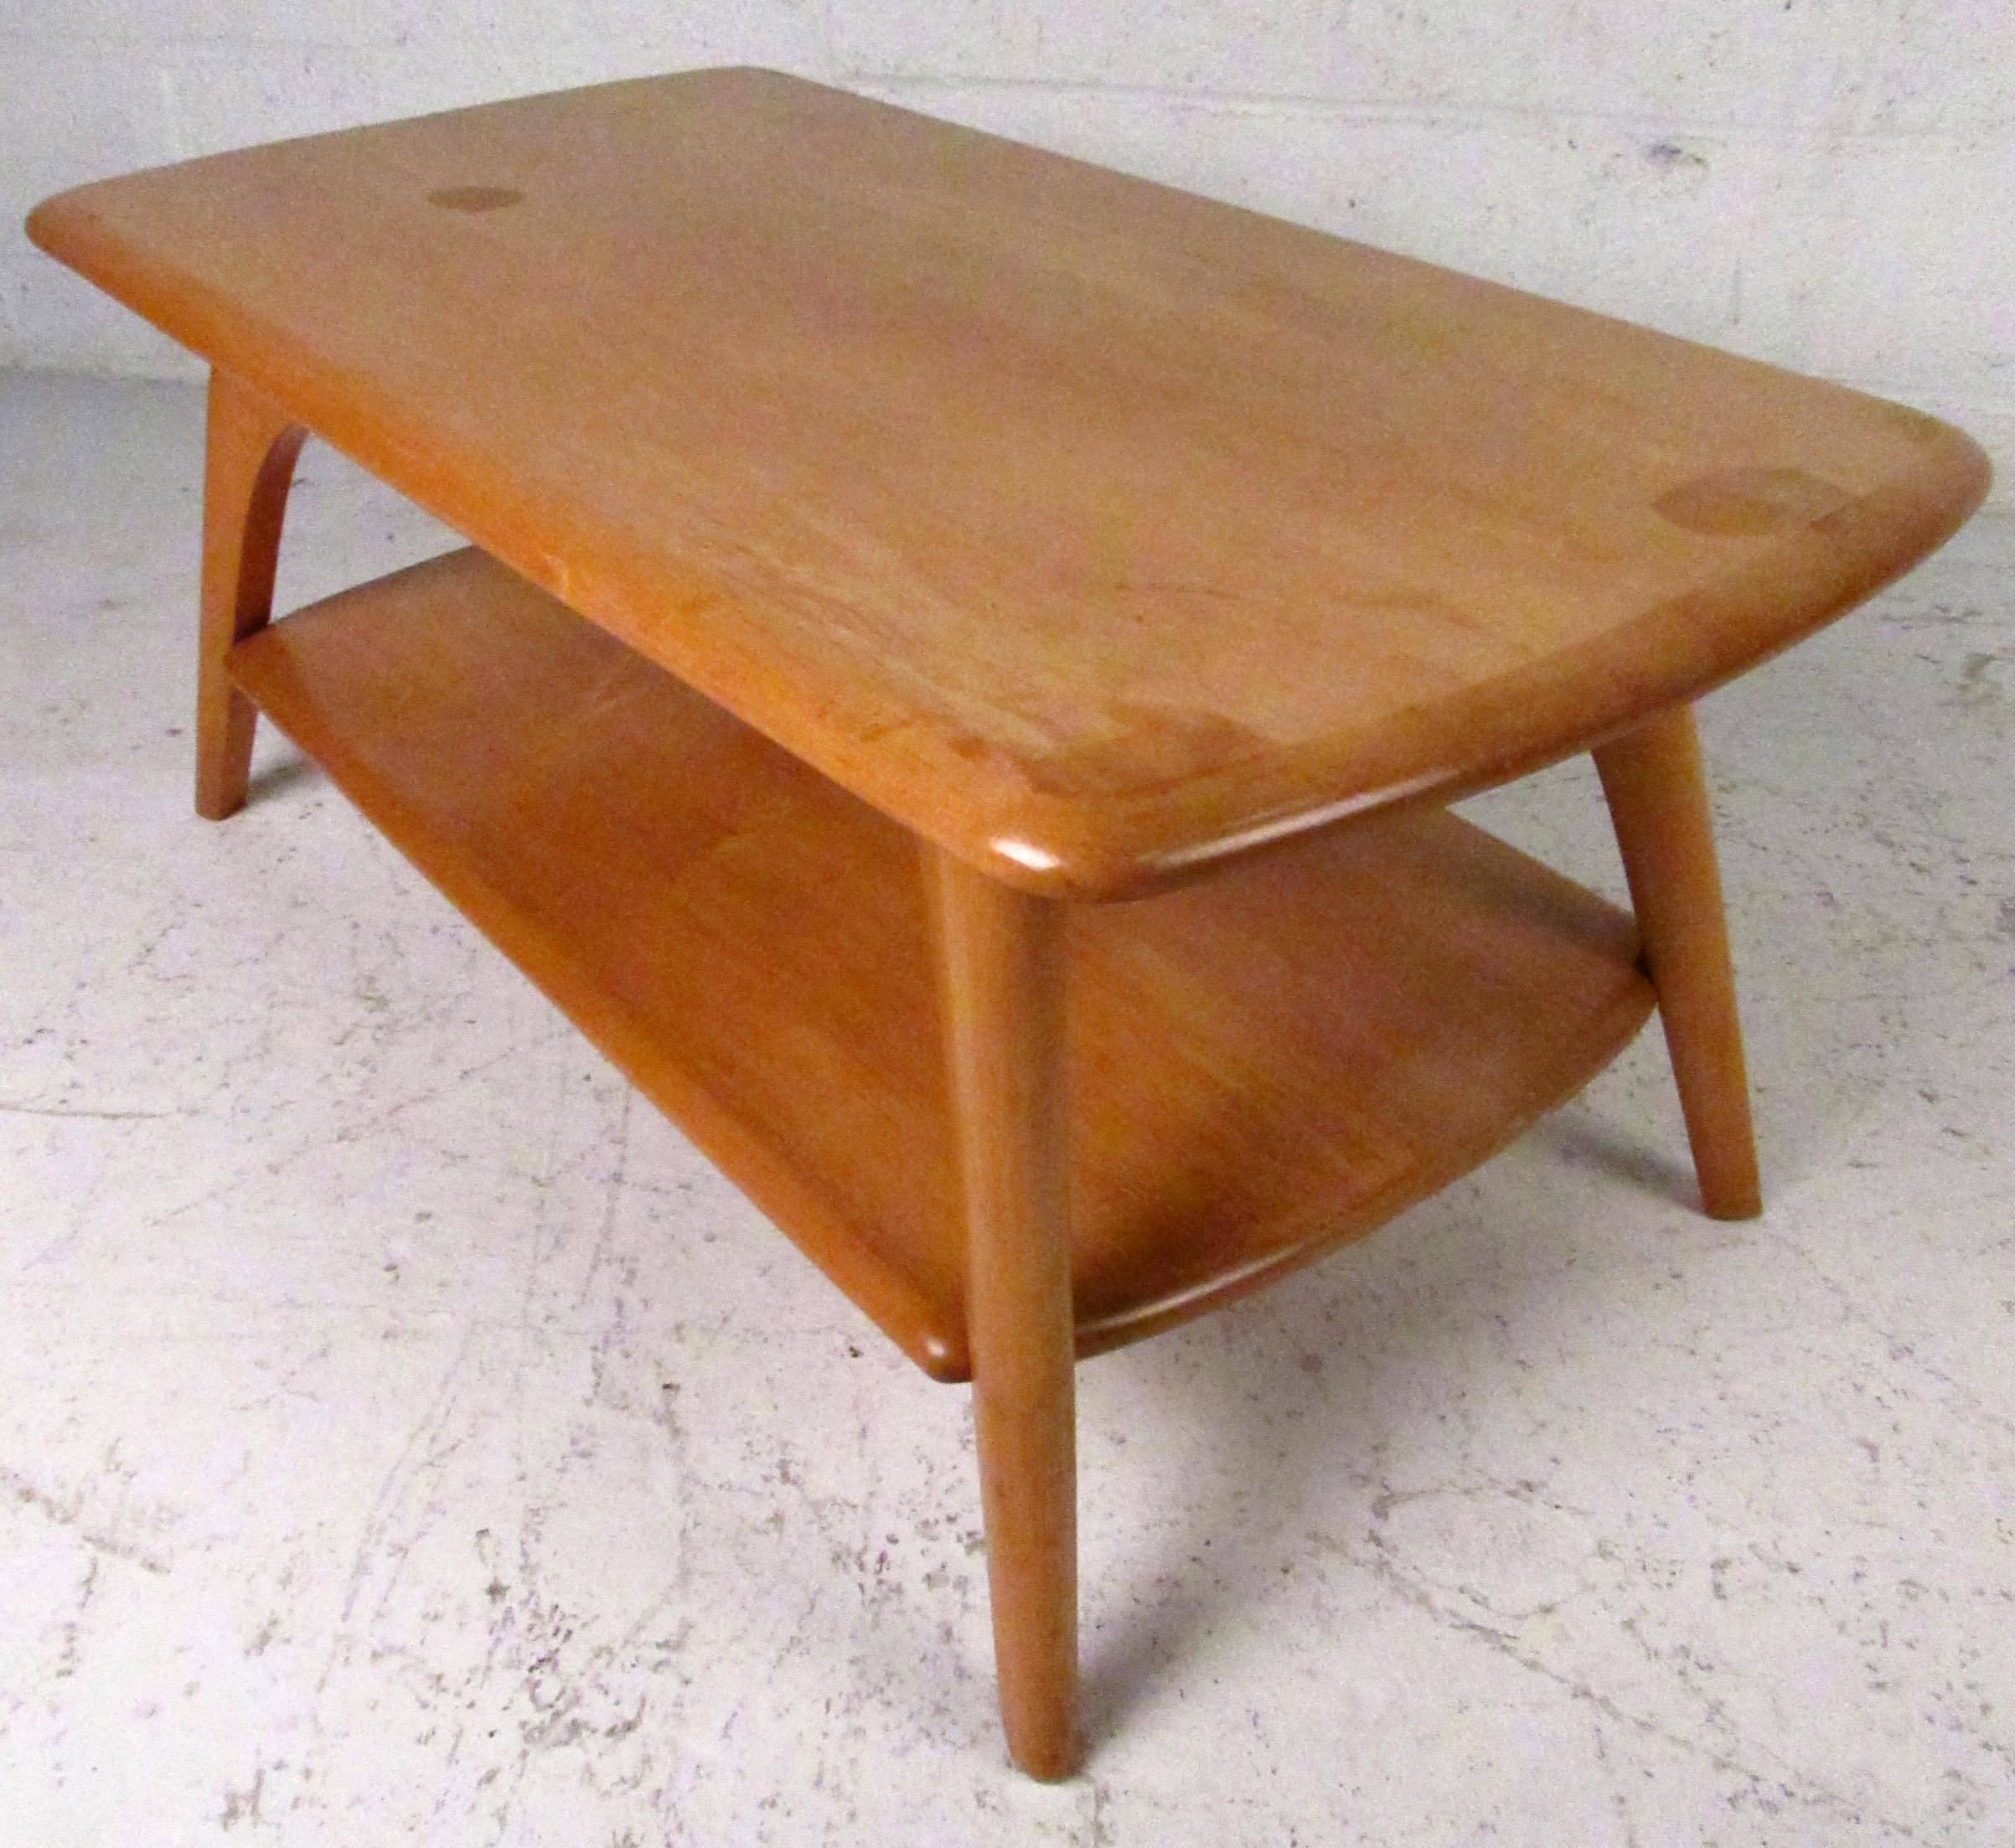 Vintage-modern two-tier maple coffee table featuring sturdy sculpted legs, designed by Brewster-Beauchemin.

Please confirm item location NY or NJ with dealer.